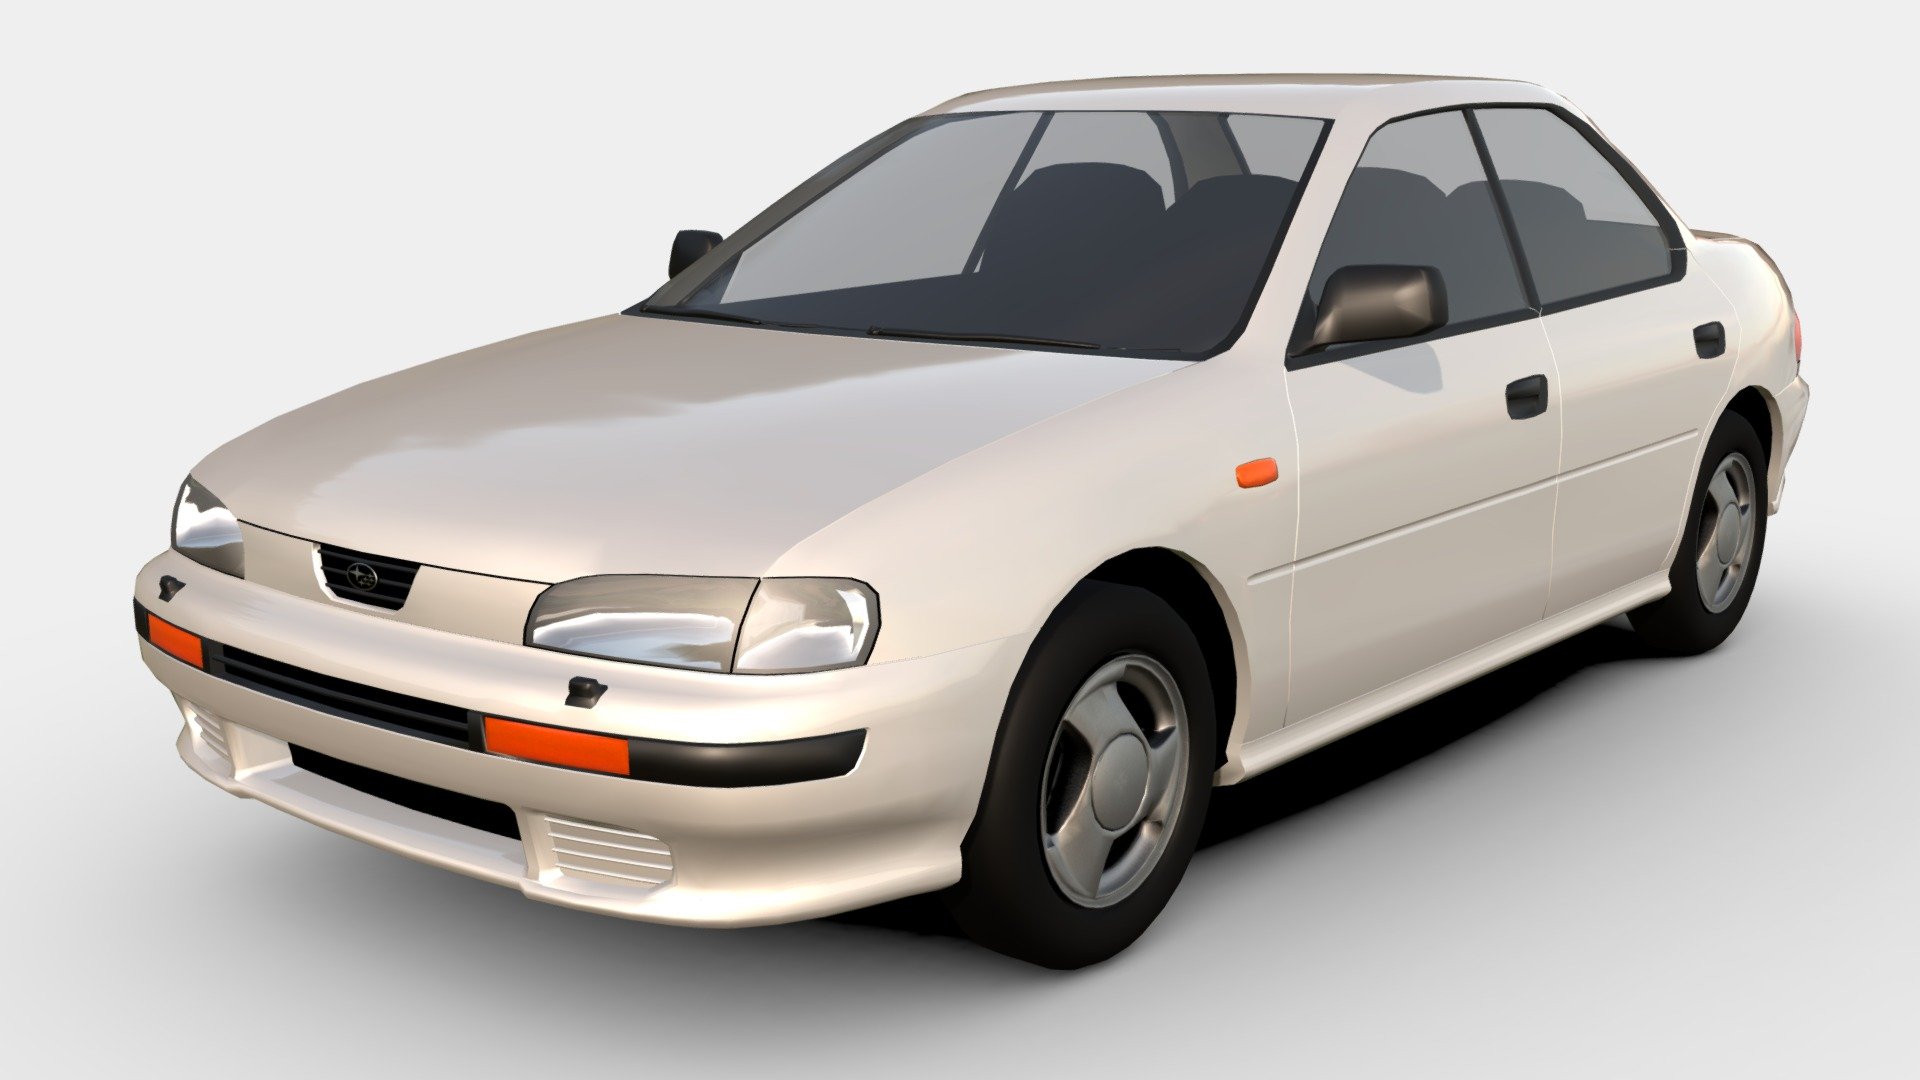 Redid my older model. the Subaru Impreza WRX, but I made it technicaly worse, but a better model. Anyway, here is the base spec 1.6 (automatic if you have to) Subaru Impreza 3d model